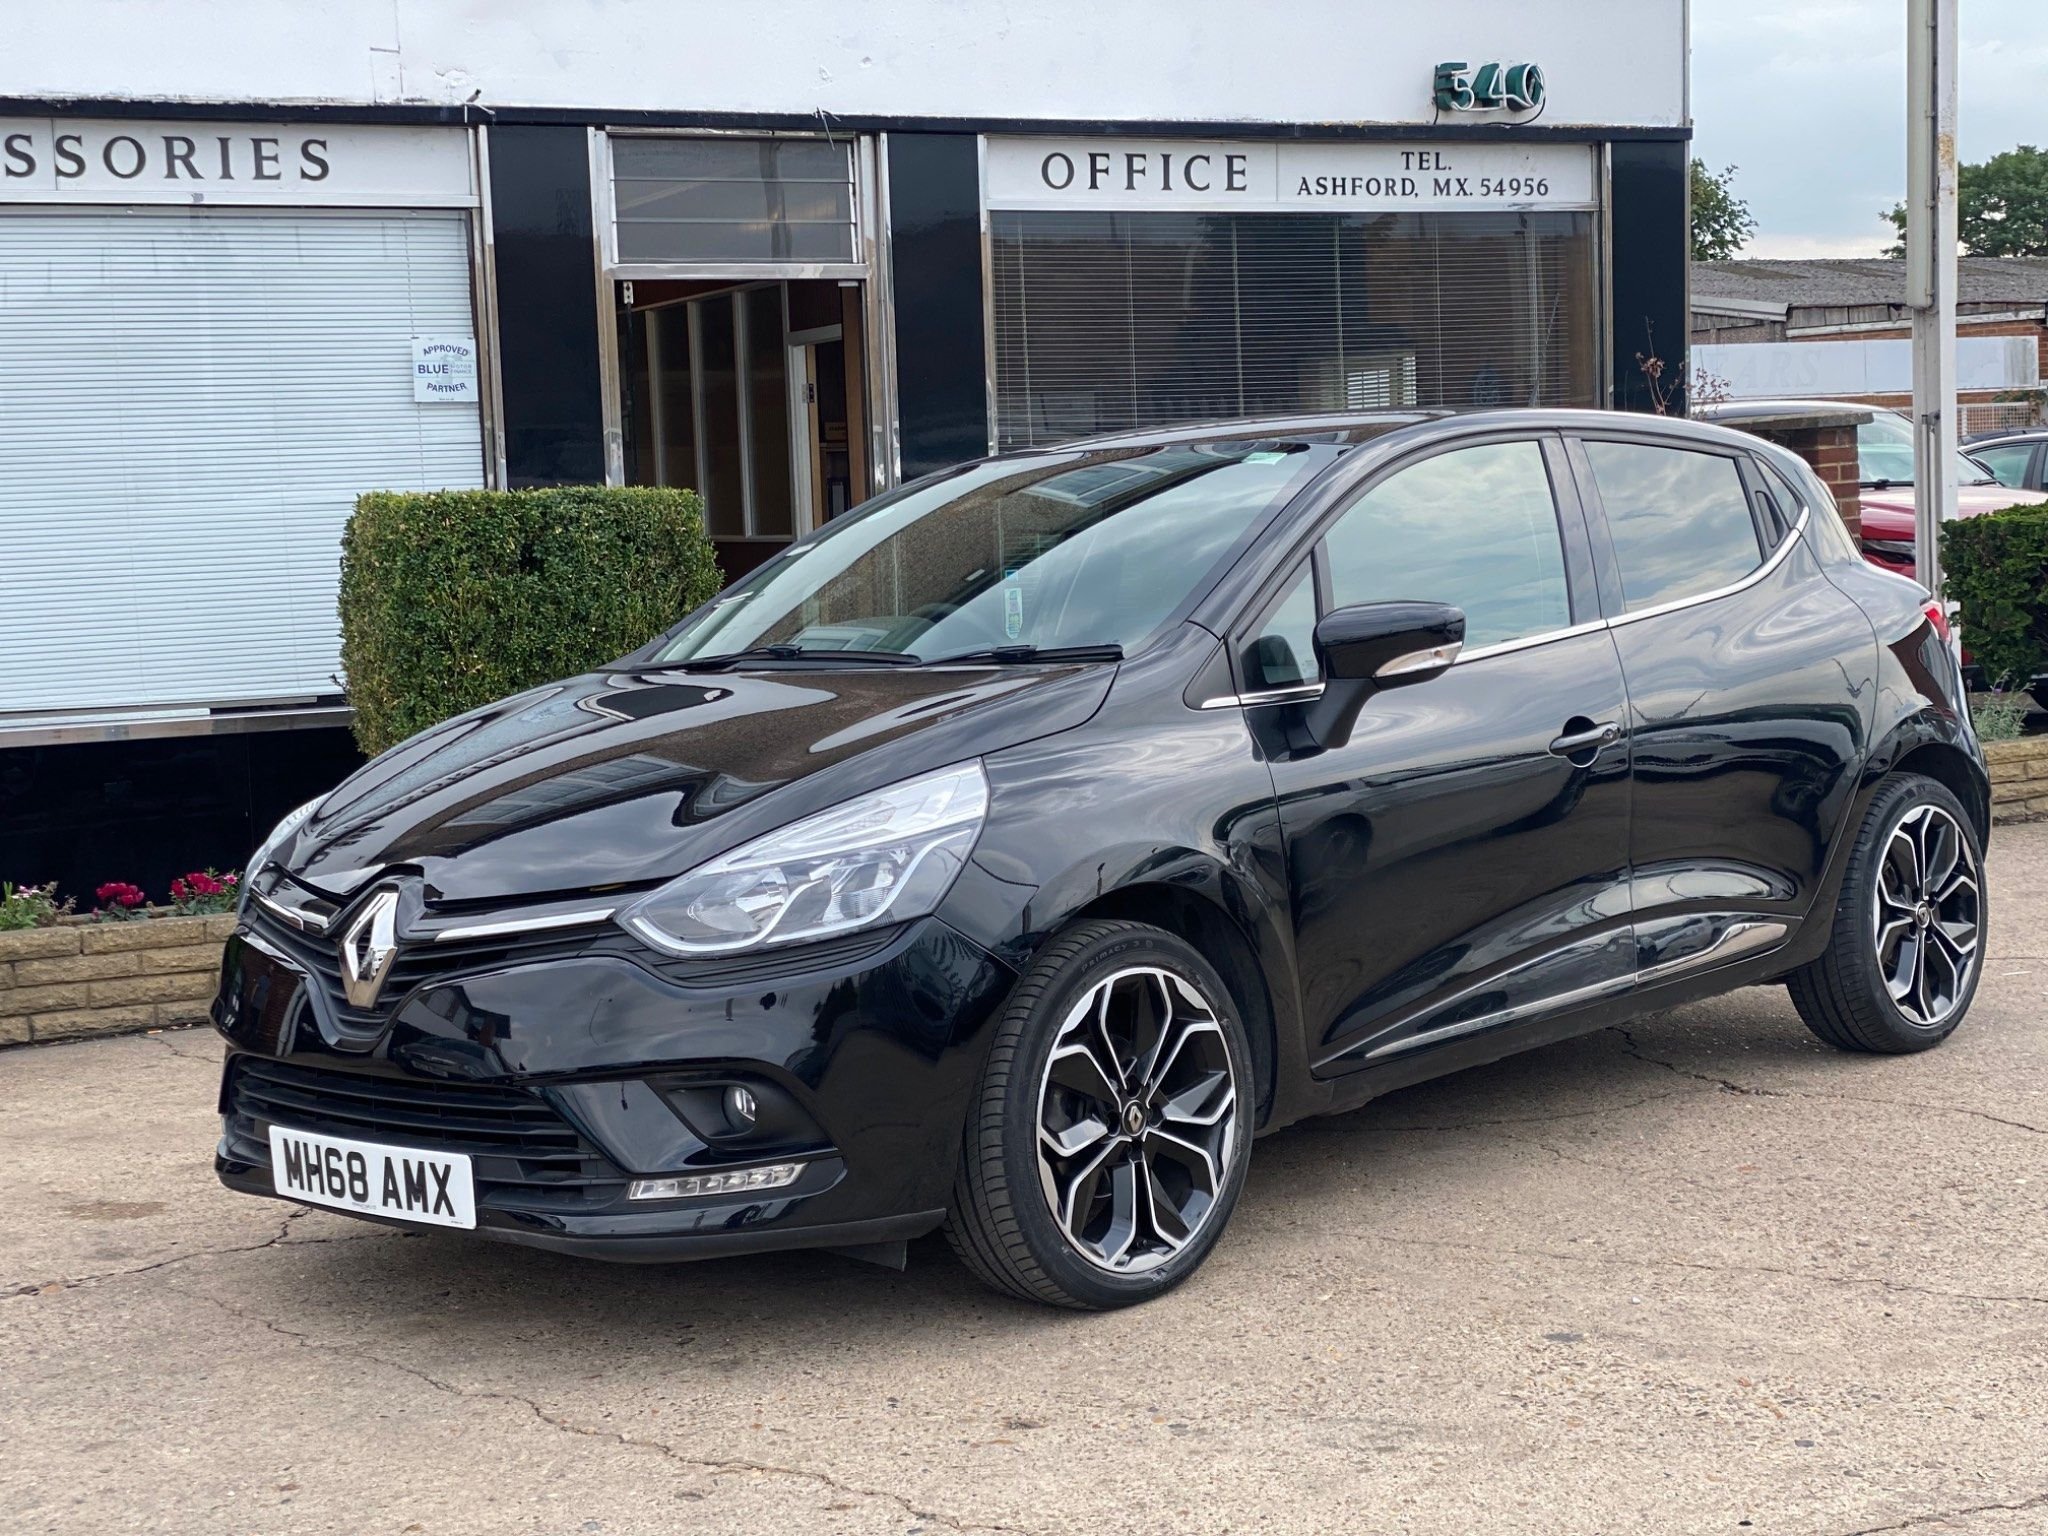 Sold 2019 Renault Clio ICONIC TCE 5-Door, Staines, Middlesex